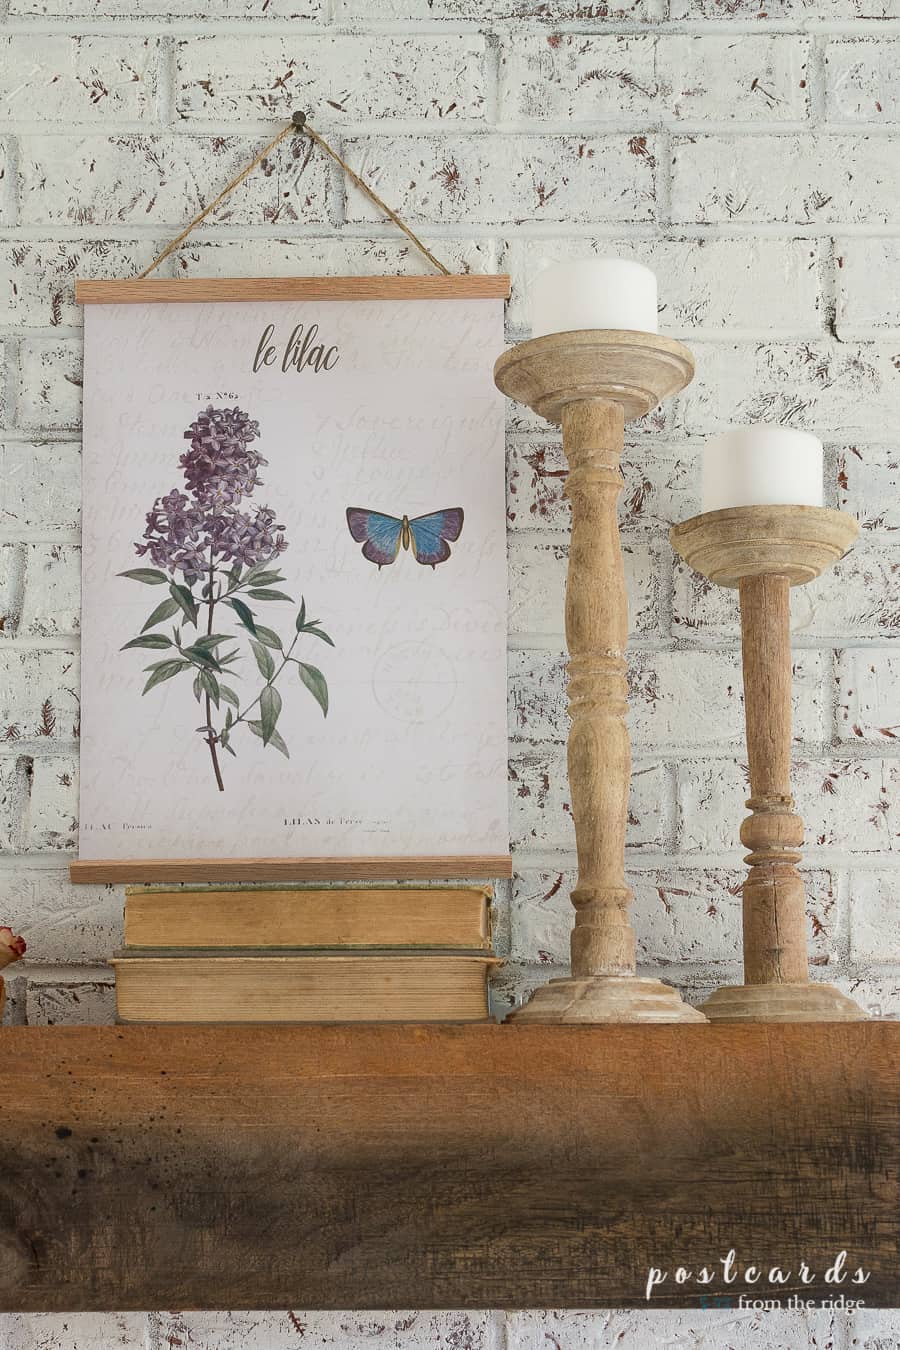 vintage book, found wooden candlesticks, and lilac botanical prints